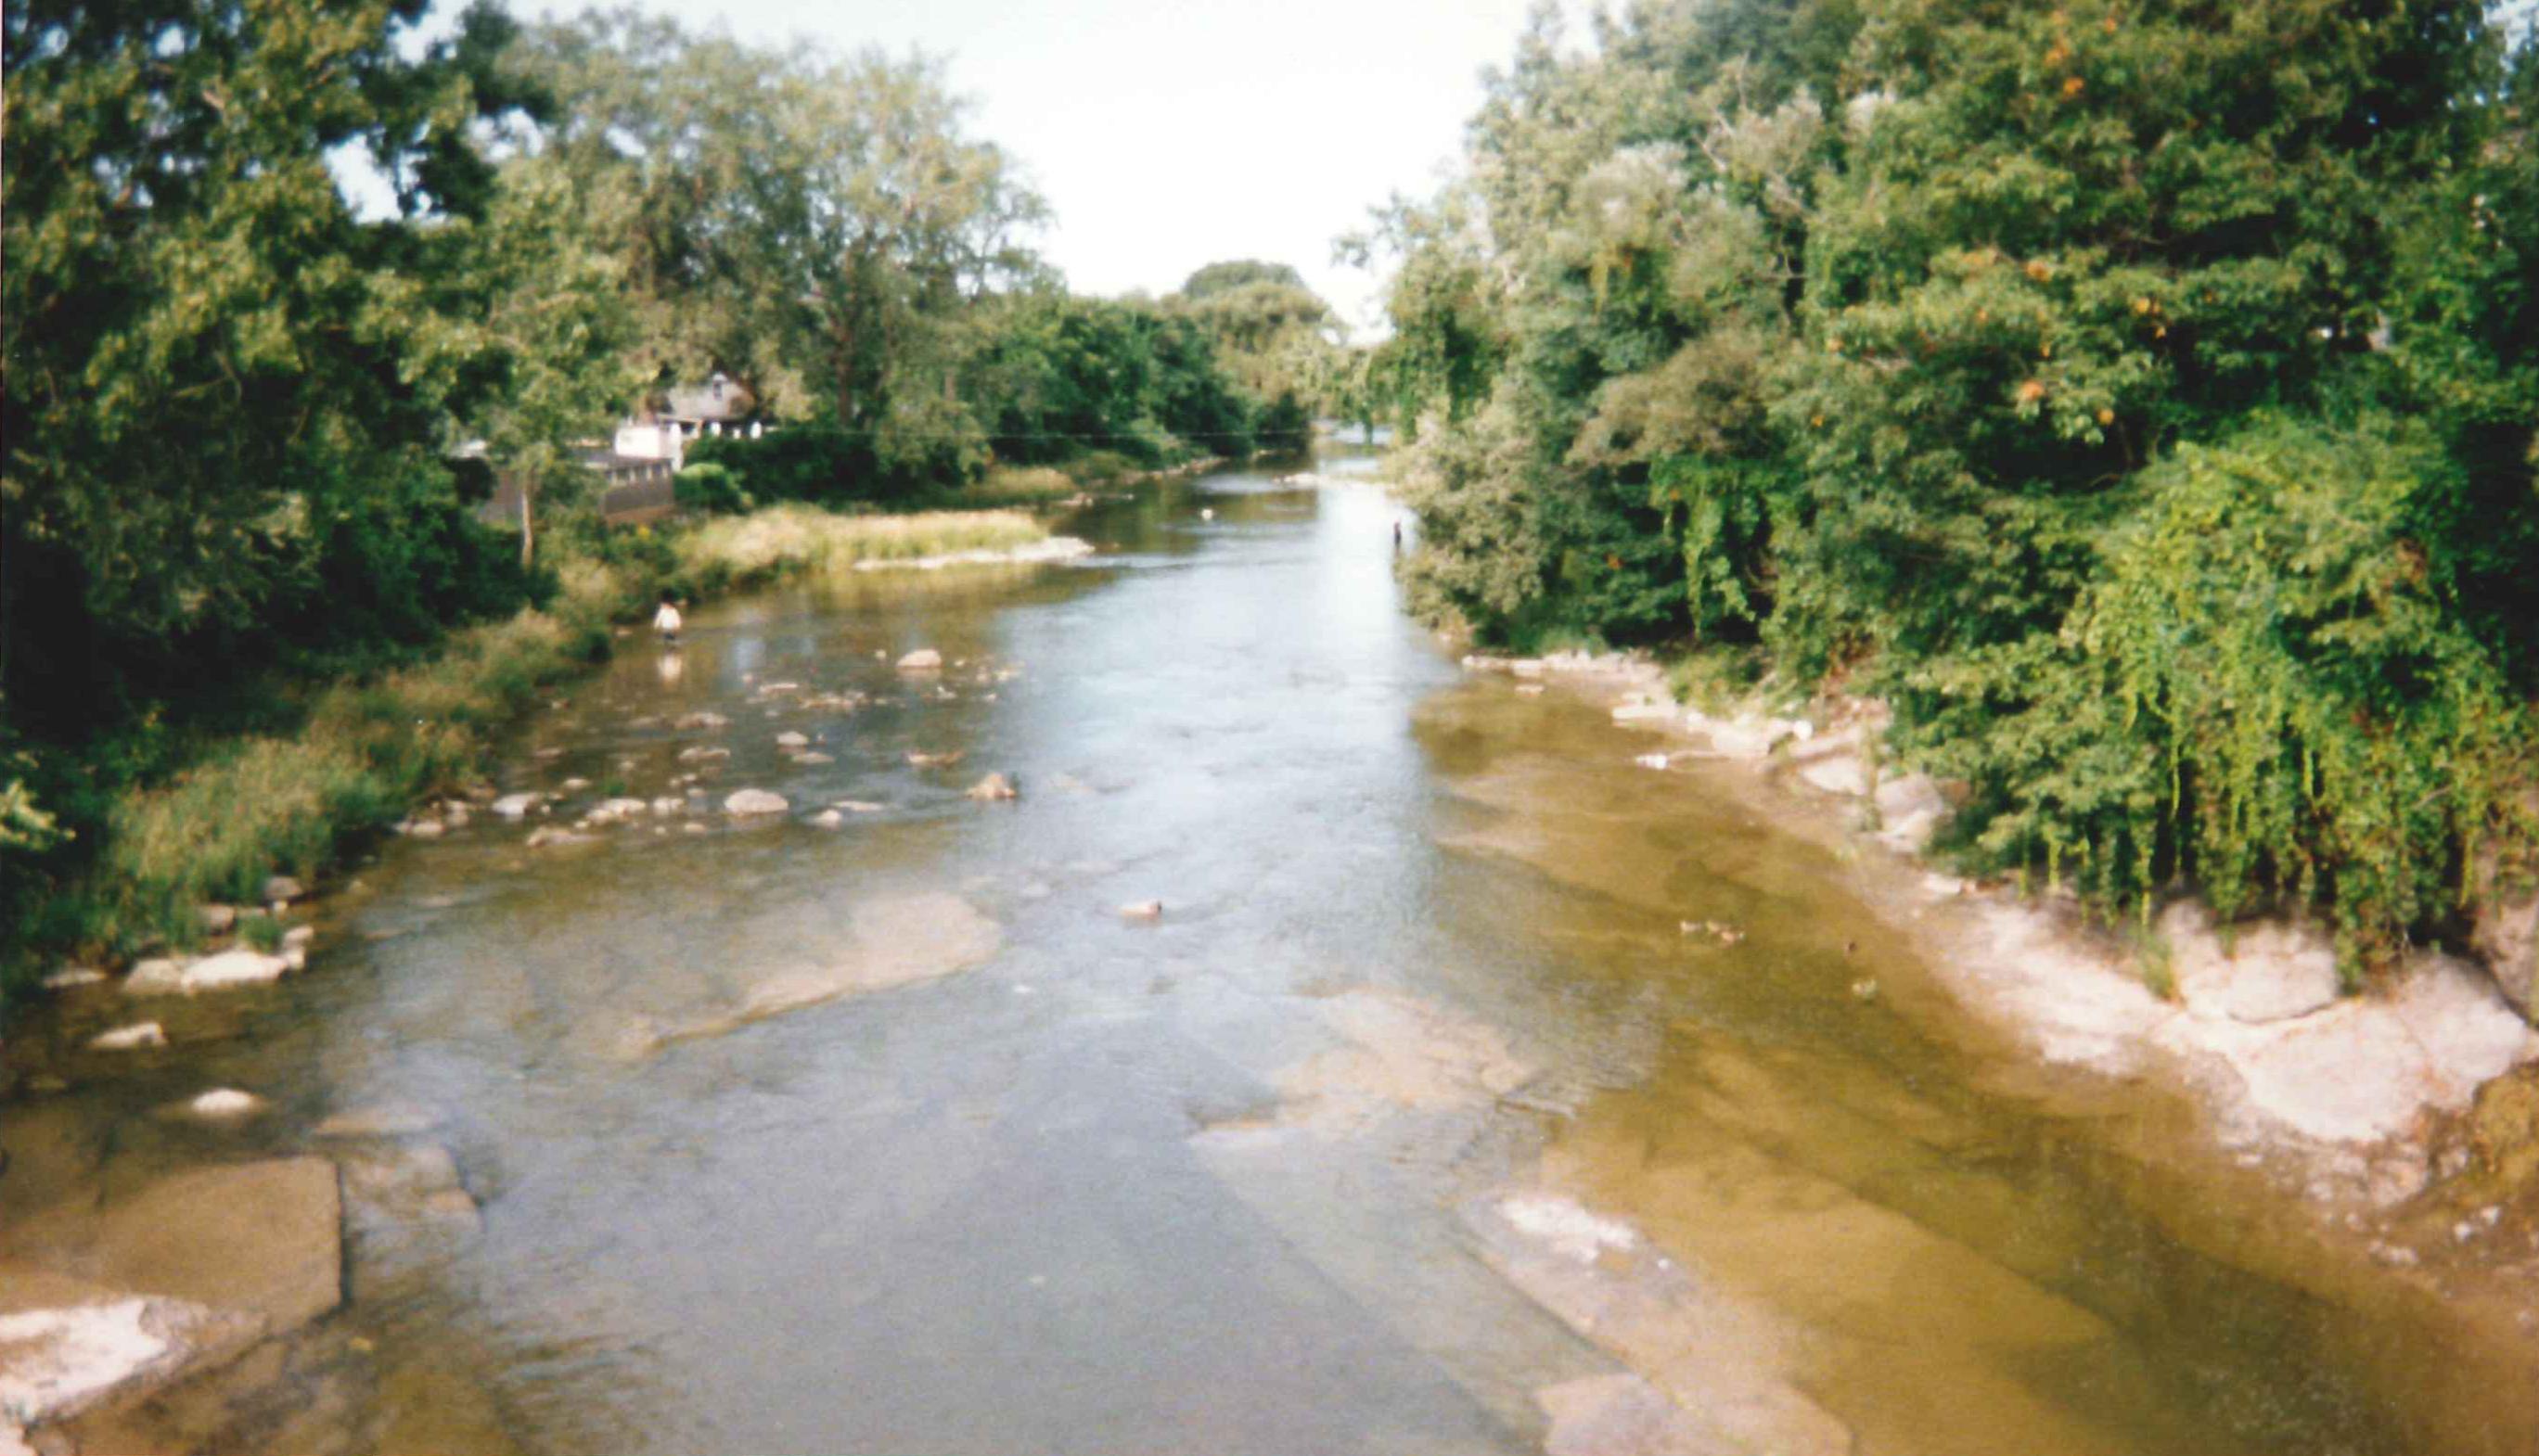 Photograph of the Buffalo Creek at Gardenville, NY (GDVN6) looking downstream